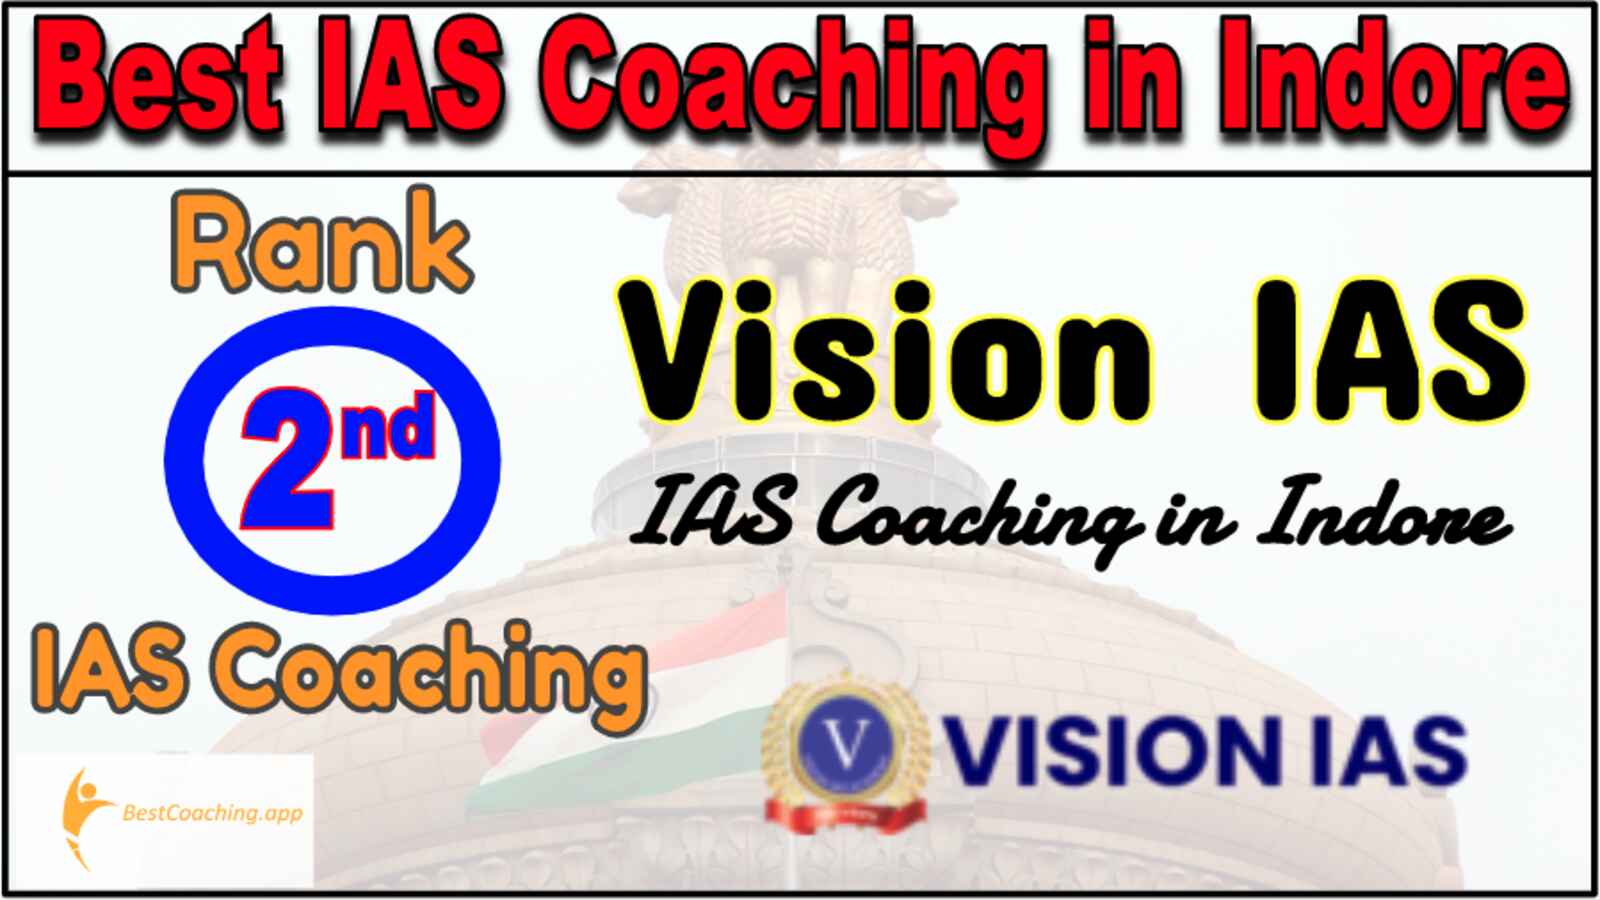 2nd Best IAS Coaching in Indore Vision IAS